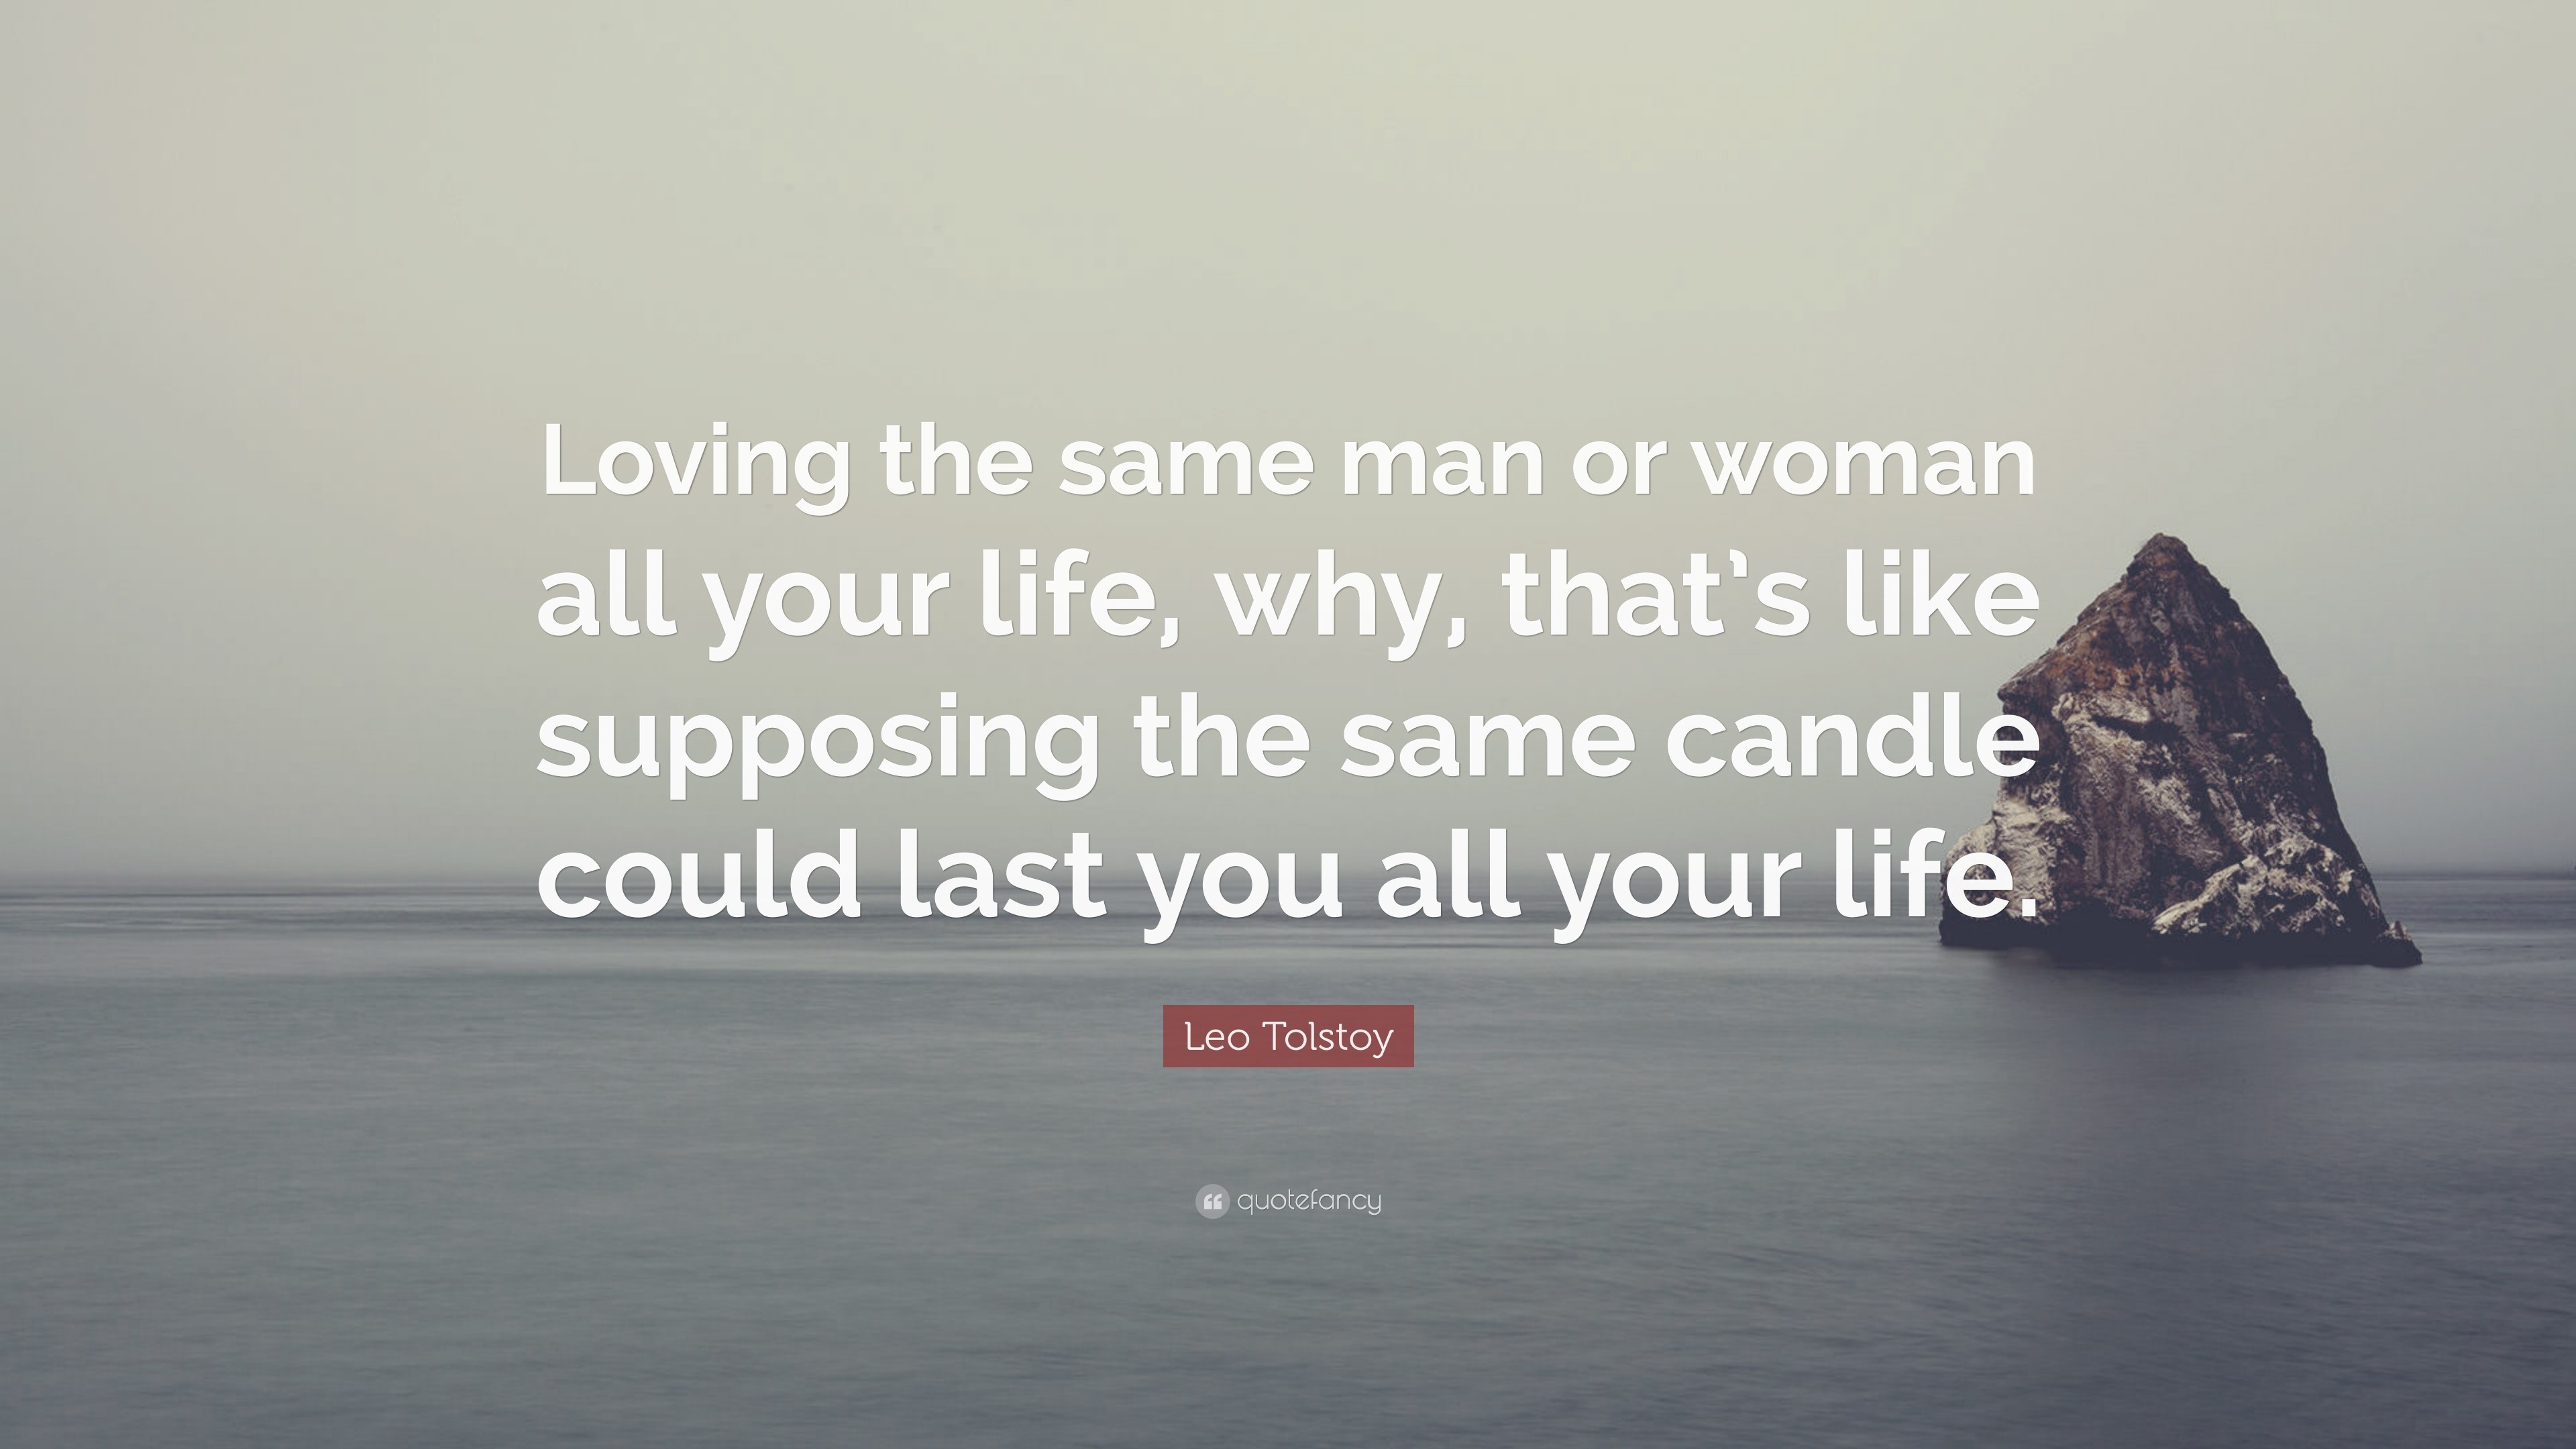 Leo Tolstoy Quote “Loving the same man or woman all your life why